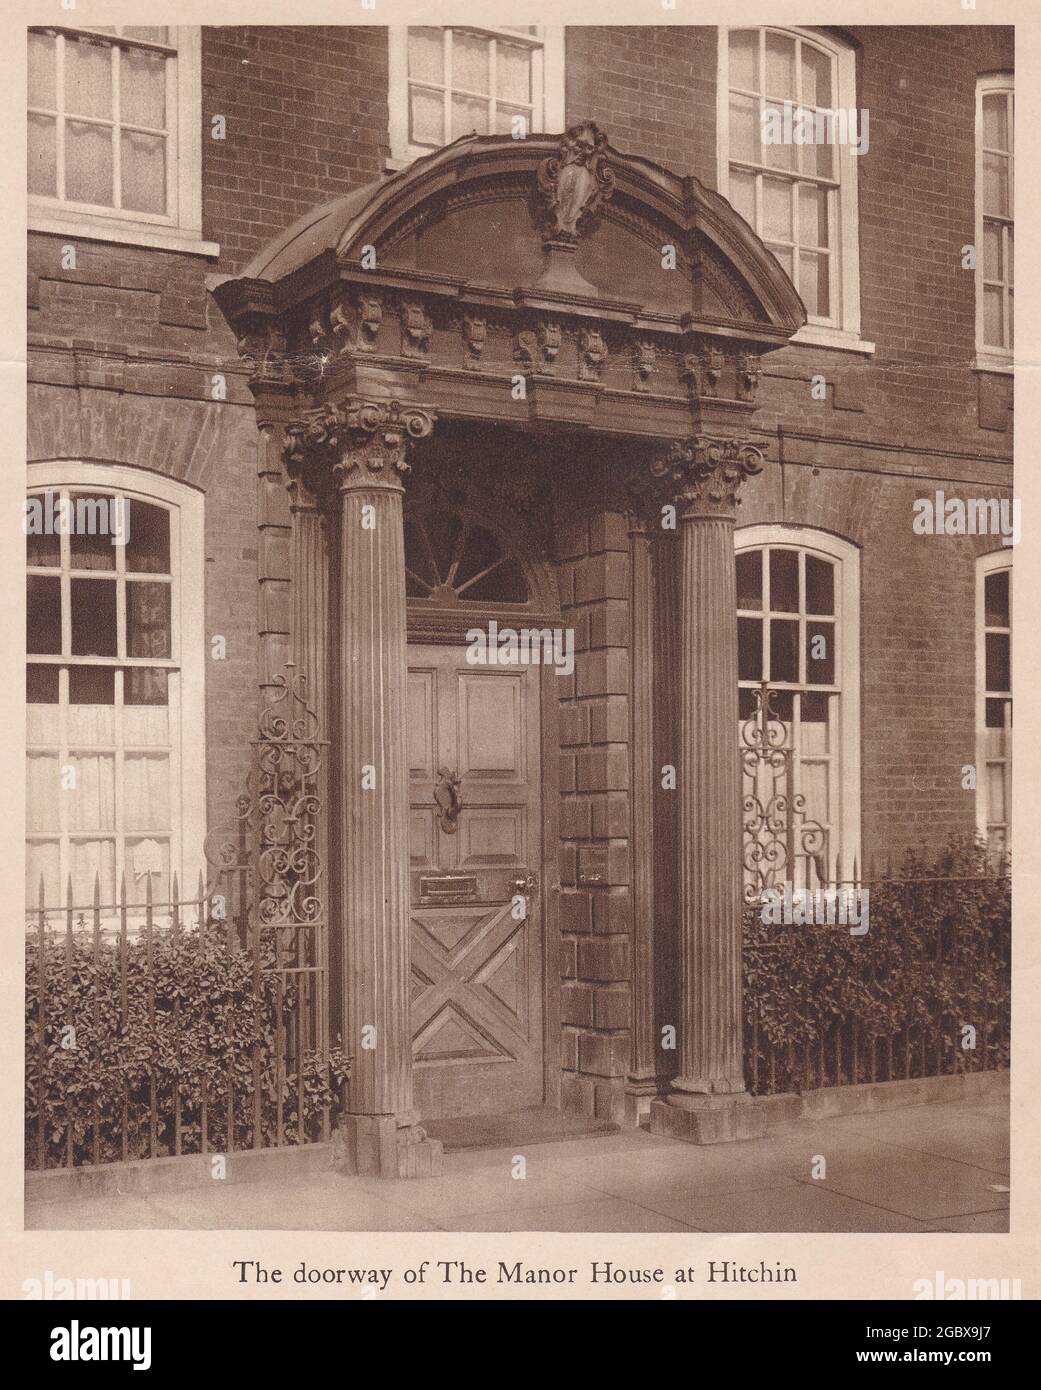 Vintage black and white photo of The Doorway of The Manor House at Hitchin 1950s? Stock Photo